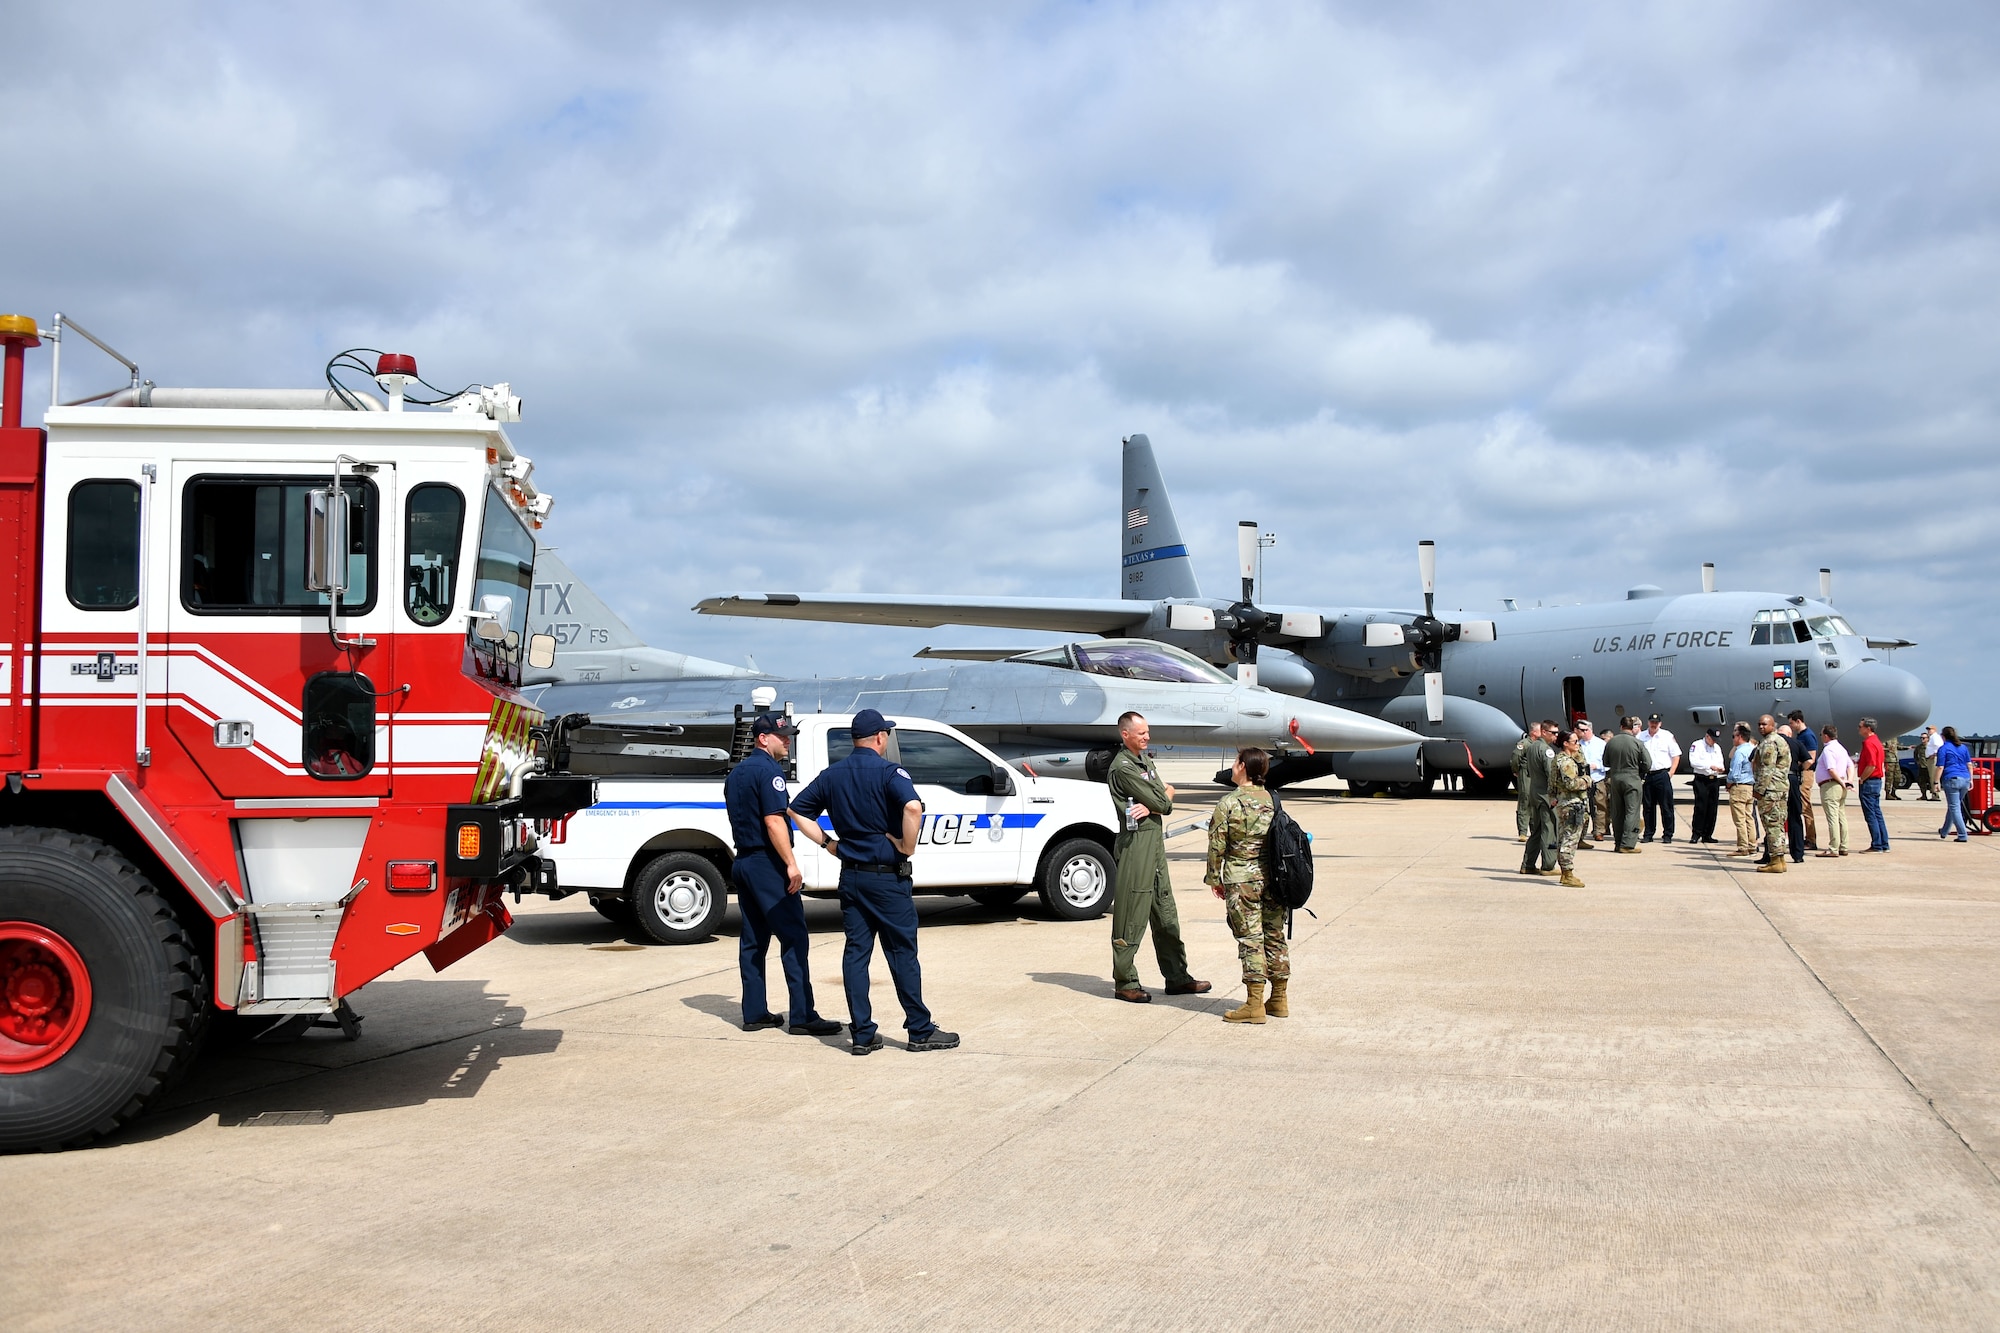 Civic leaders from the Dallas/Fort Worth area tour the designated Air Force portion of flight line during the Civic Leader Day Event held June 11, 2021, at U.S. Naval Air Station Joint Reserve Base Fort Worth, Texas. This location highlighted base fire department and 301 FW Security Forces, while featuring the 301 FW and the Texas Air National Guard 136th Airlift Wing, which personified total force integration in order to get the mission accomplished. (U.S. Air Force photo by Staff Sgt. Randall Moose)